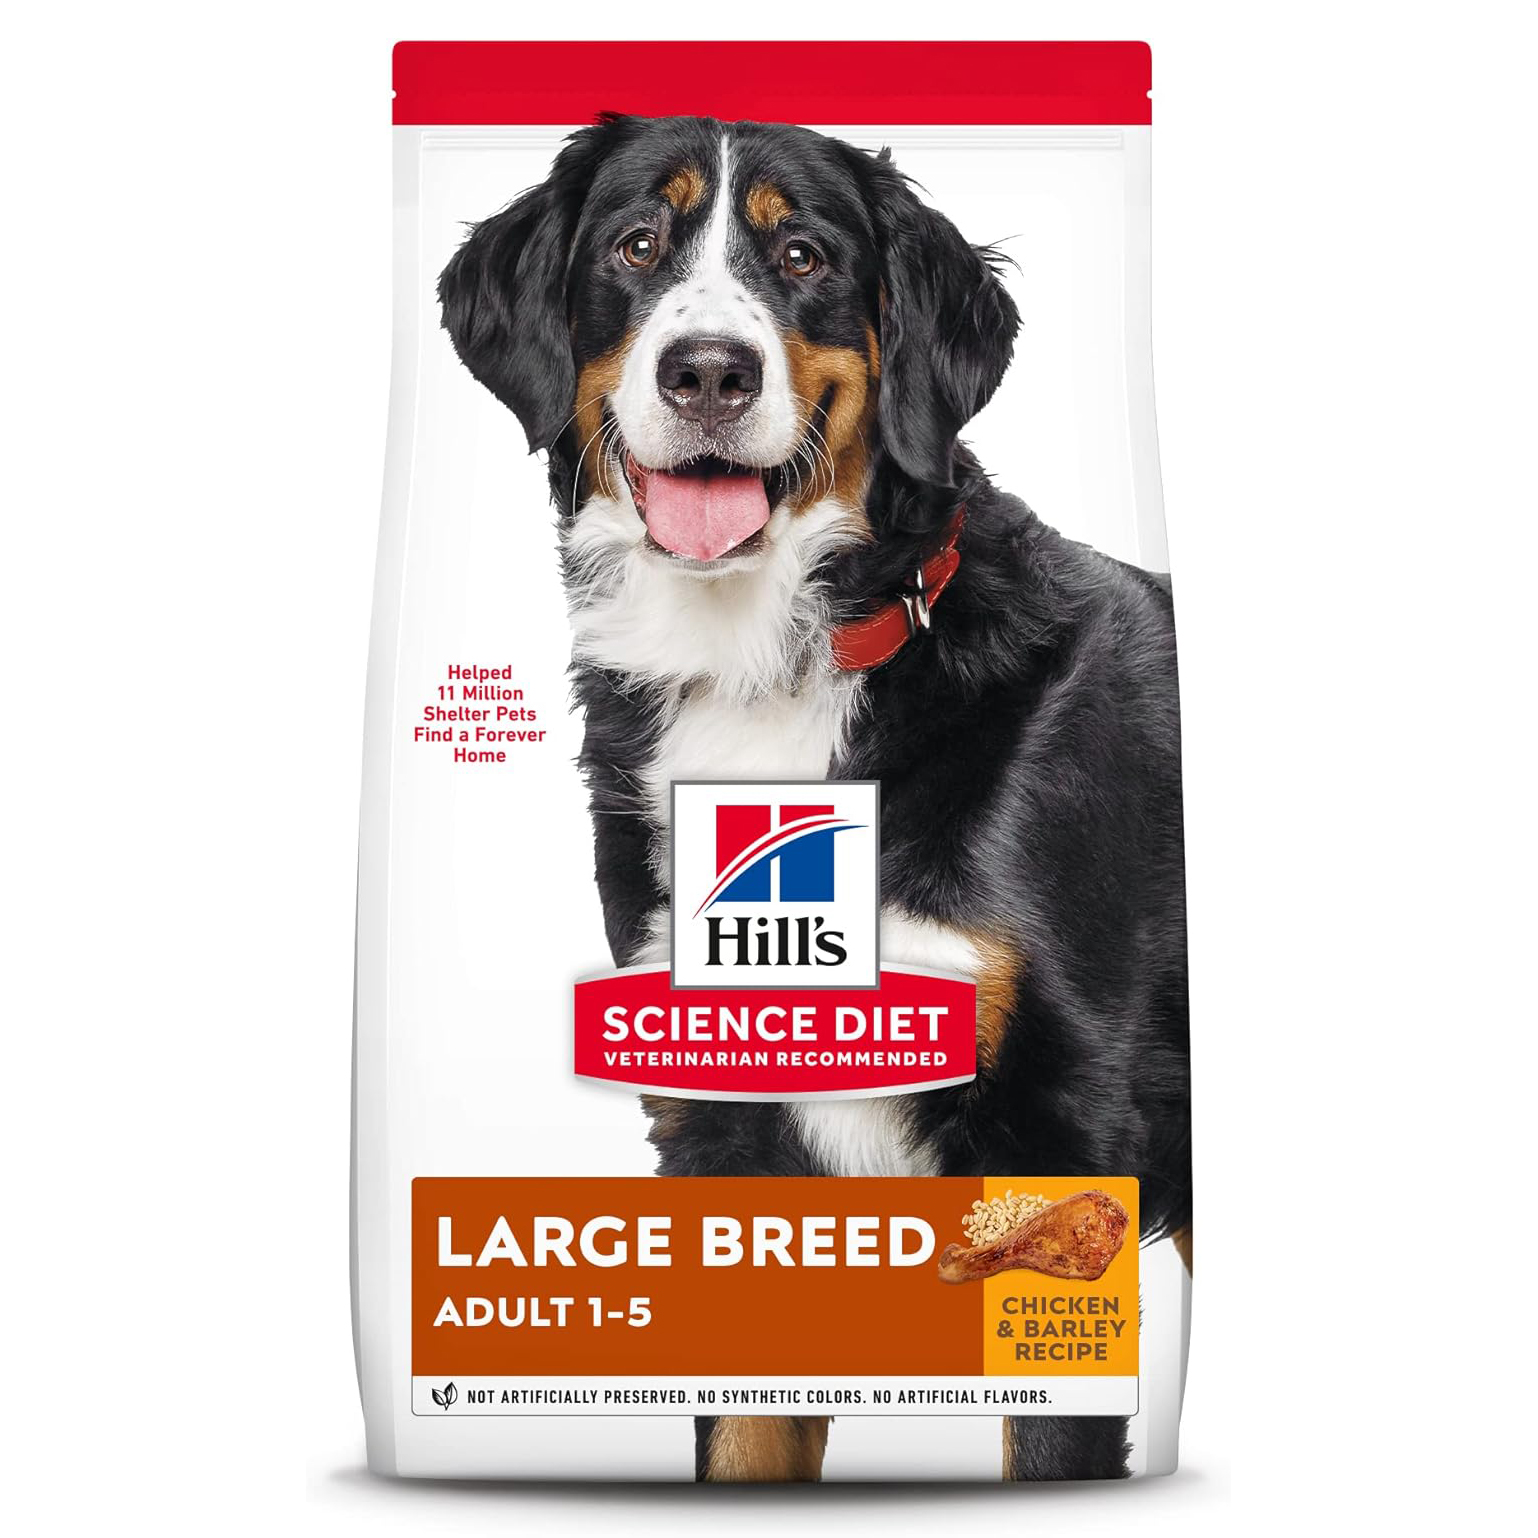 Hill’s Science Diet Adult Large Breed Dog Food